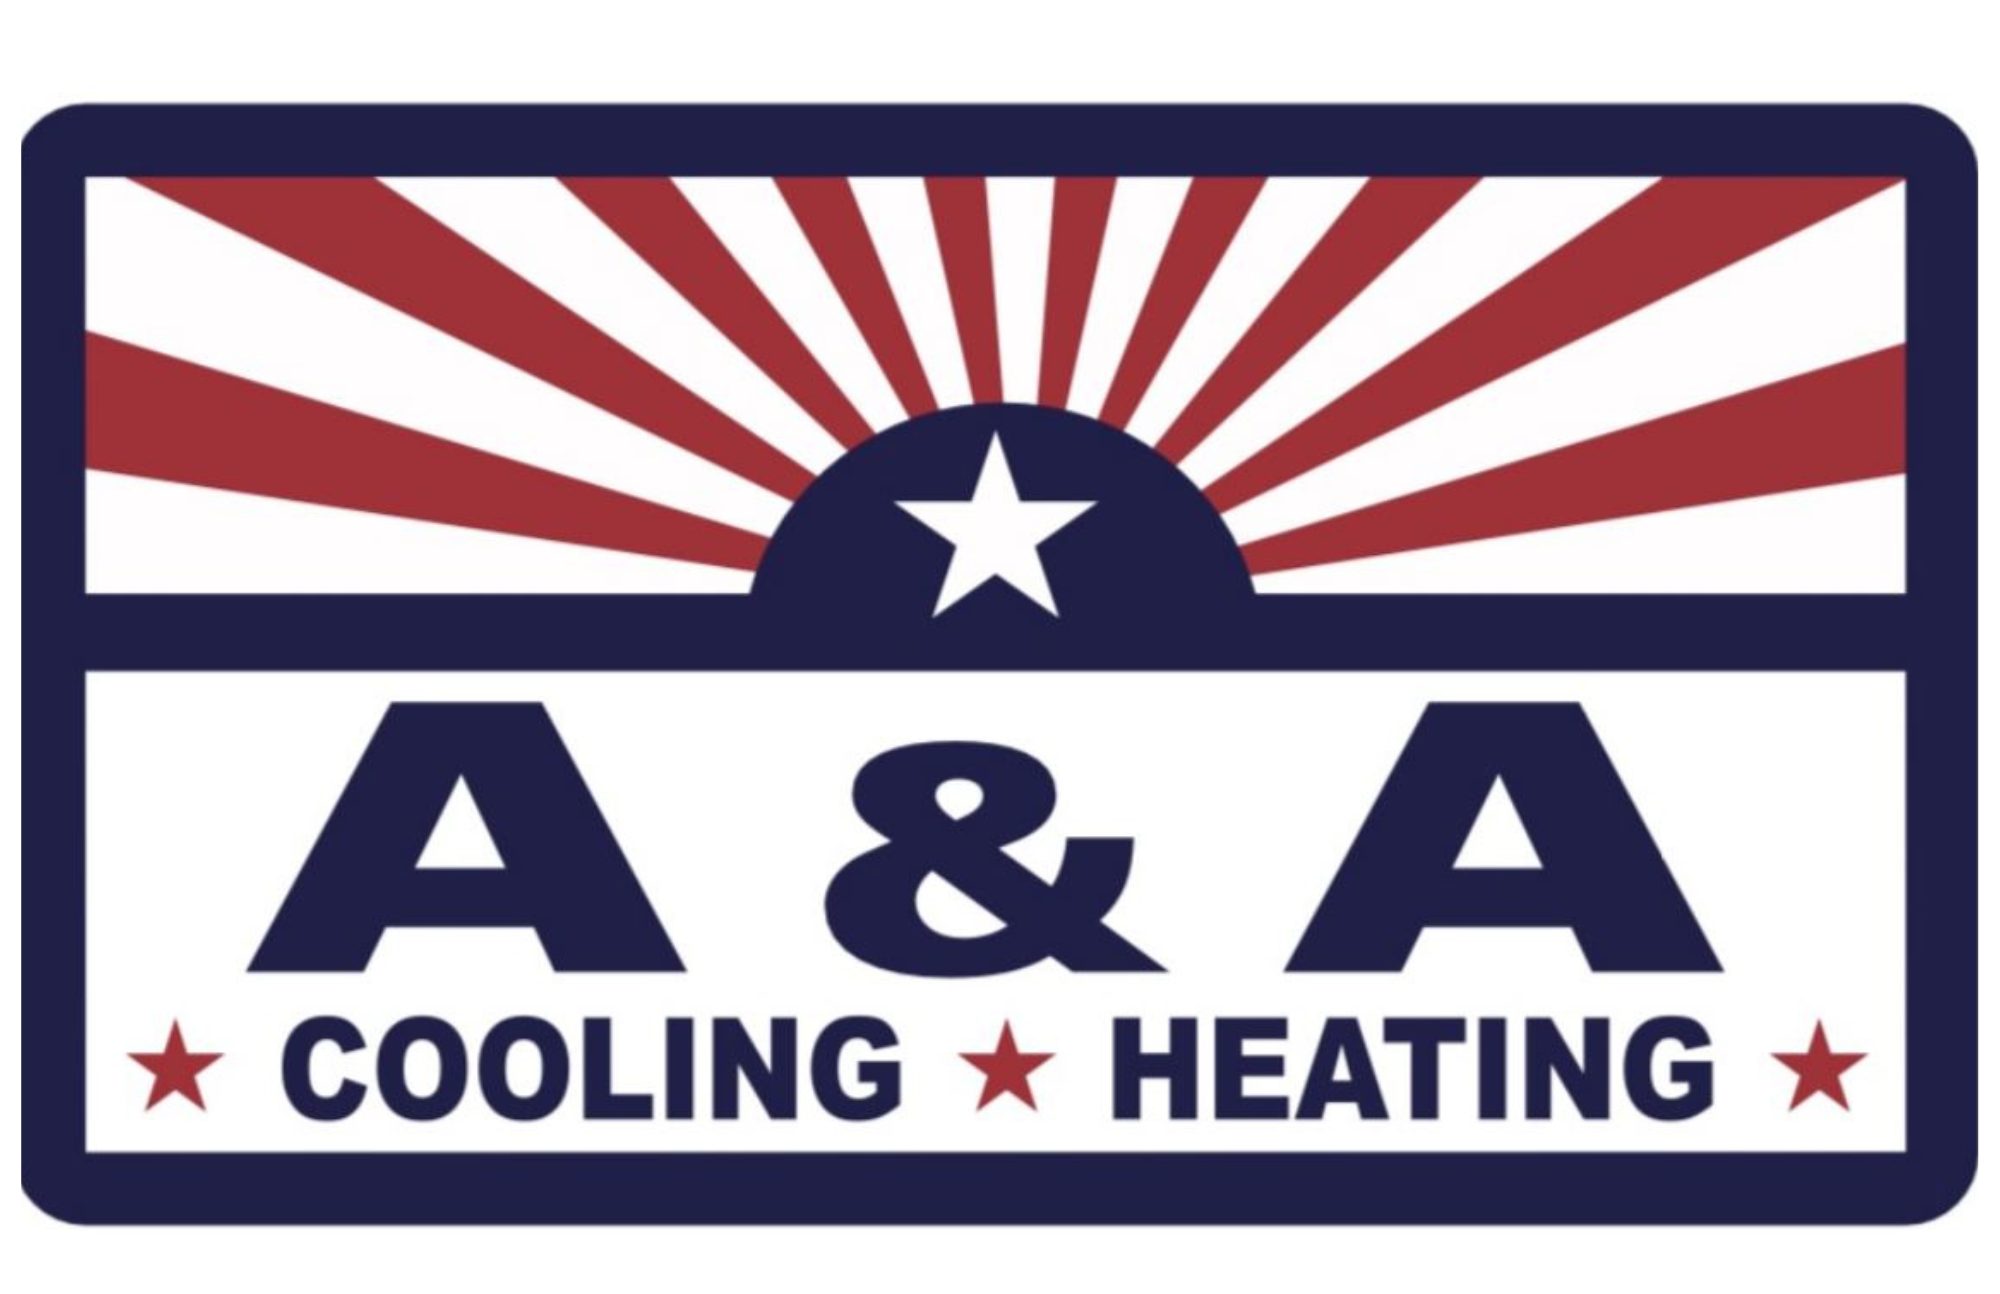 Thank you to A & A Cooling and Heating for being our Awards Luncheon Sponsor for the 2022 Superstition Open Golf Tournament.